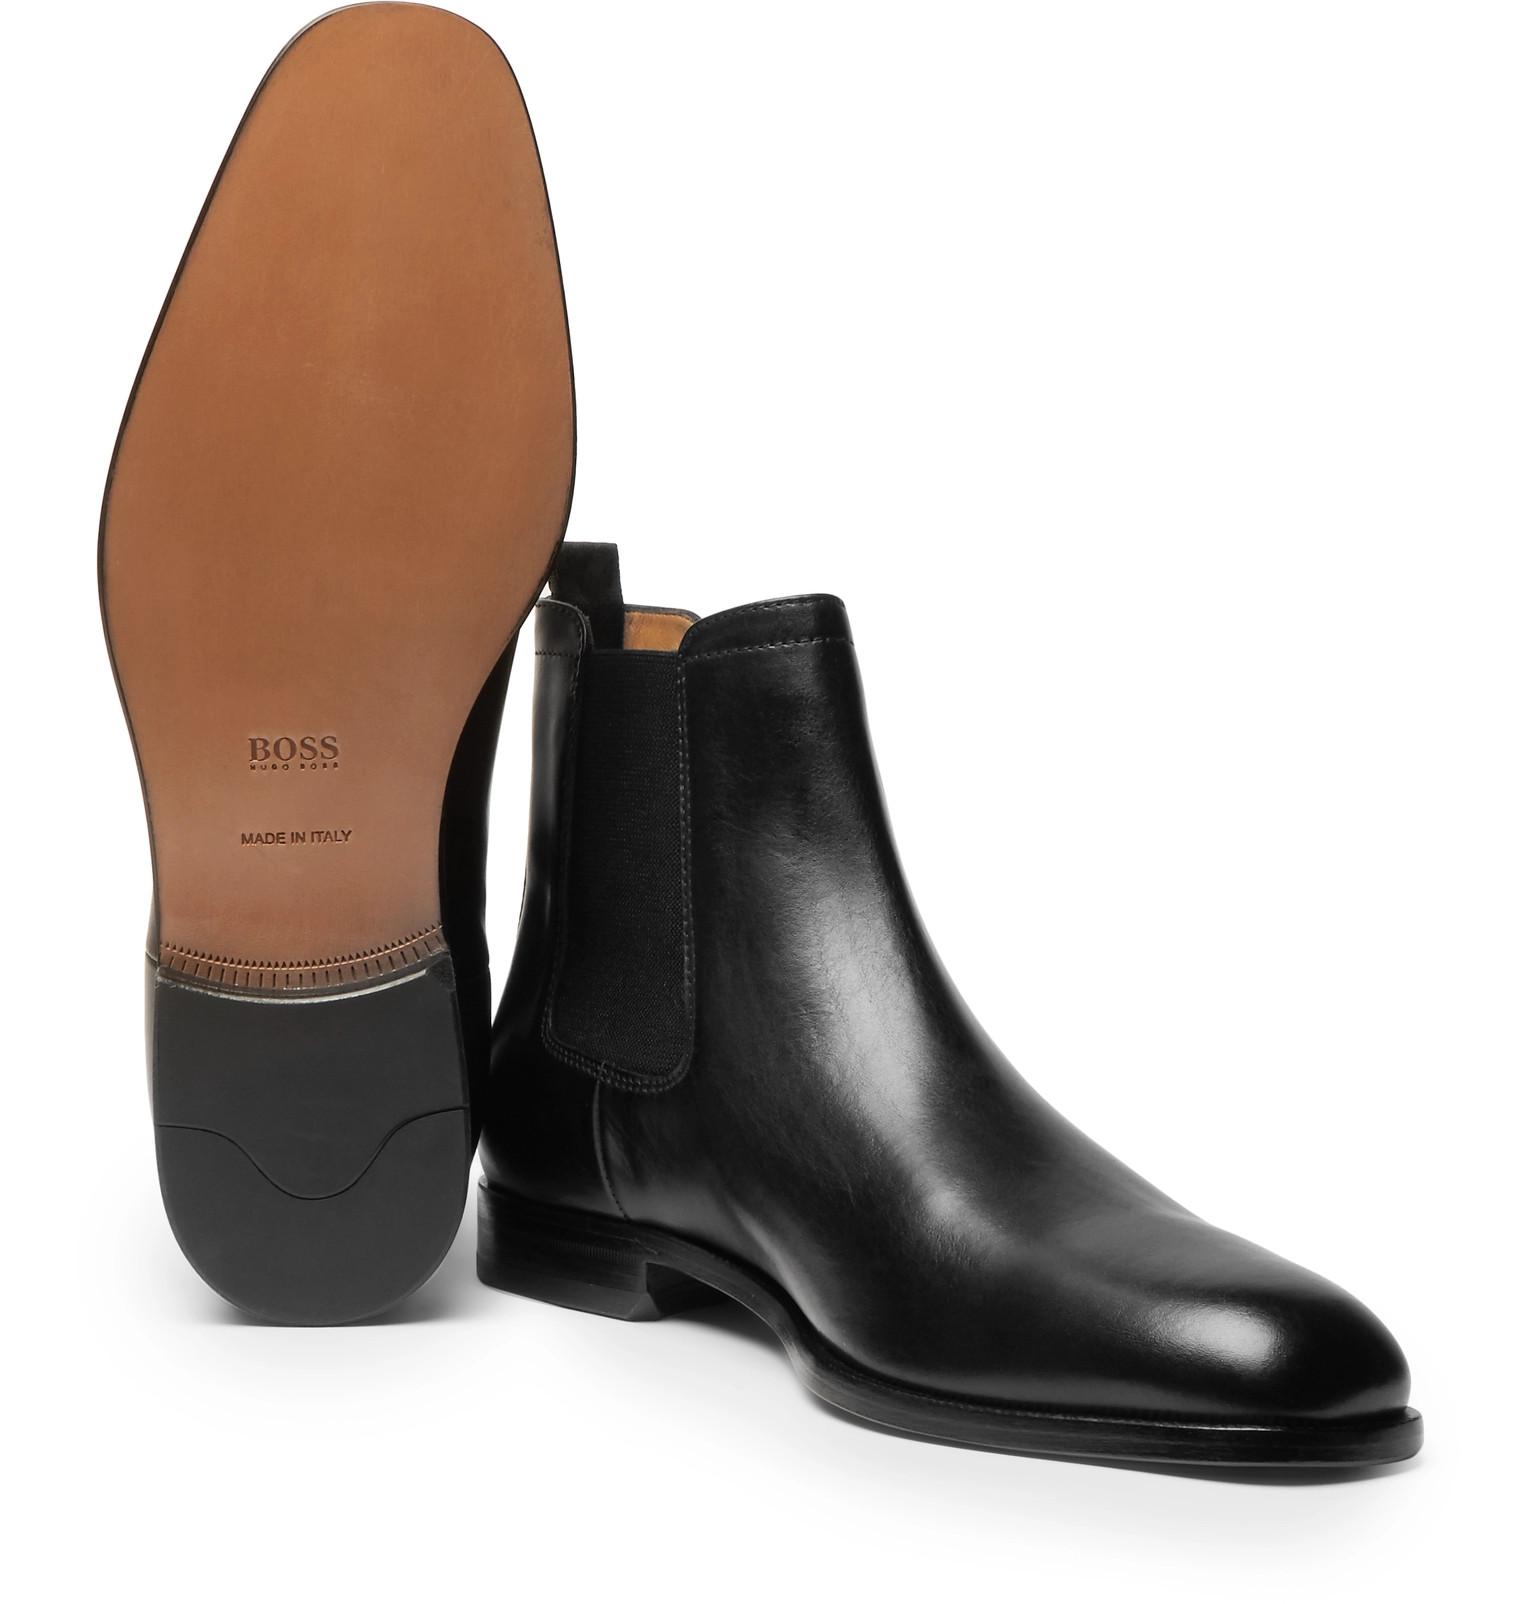 BOSS by HUGO BOSS Cardiff Leather Chelsea Boots in Black for Men - Lyst